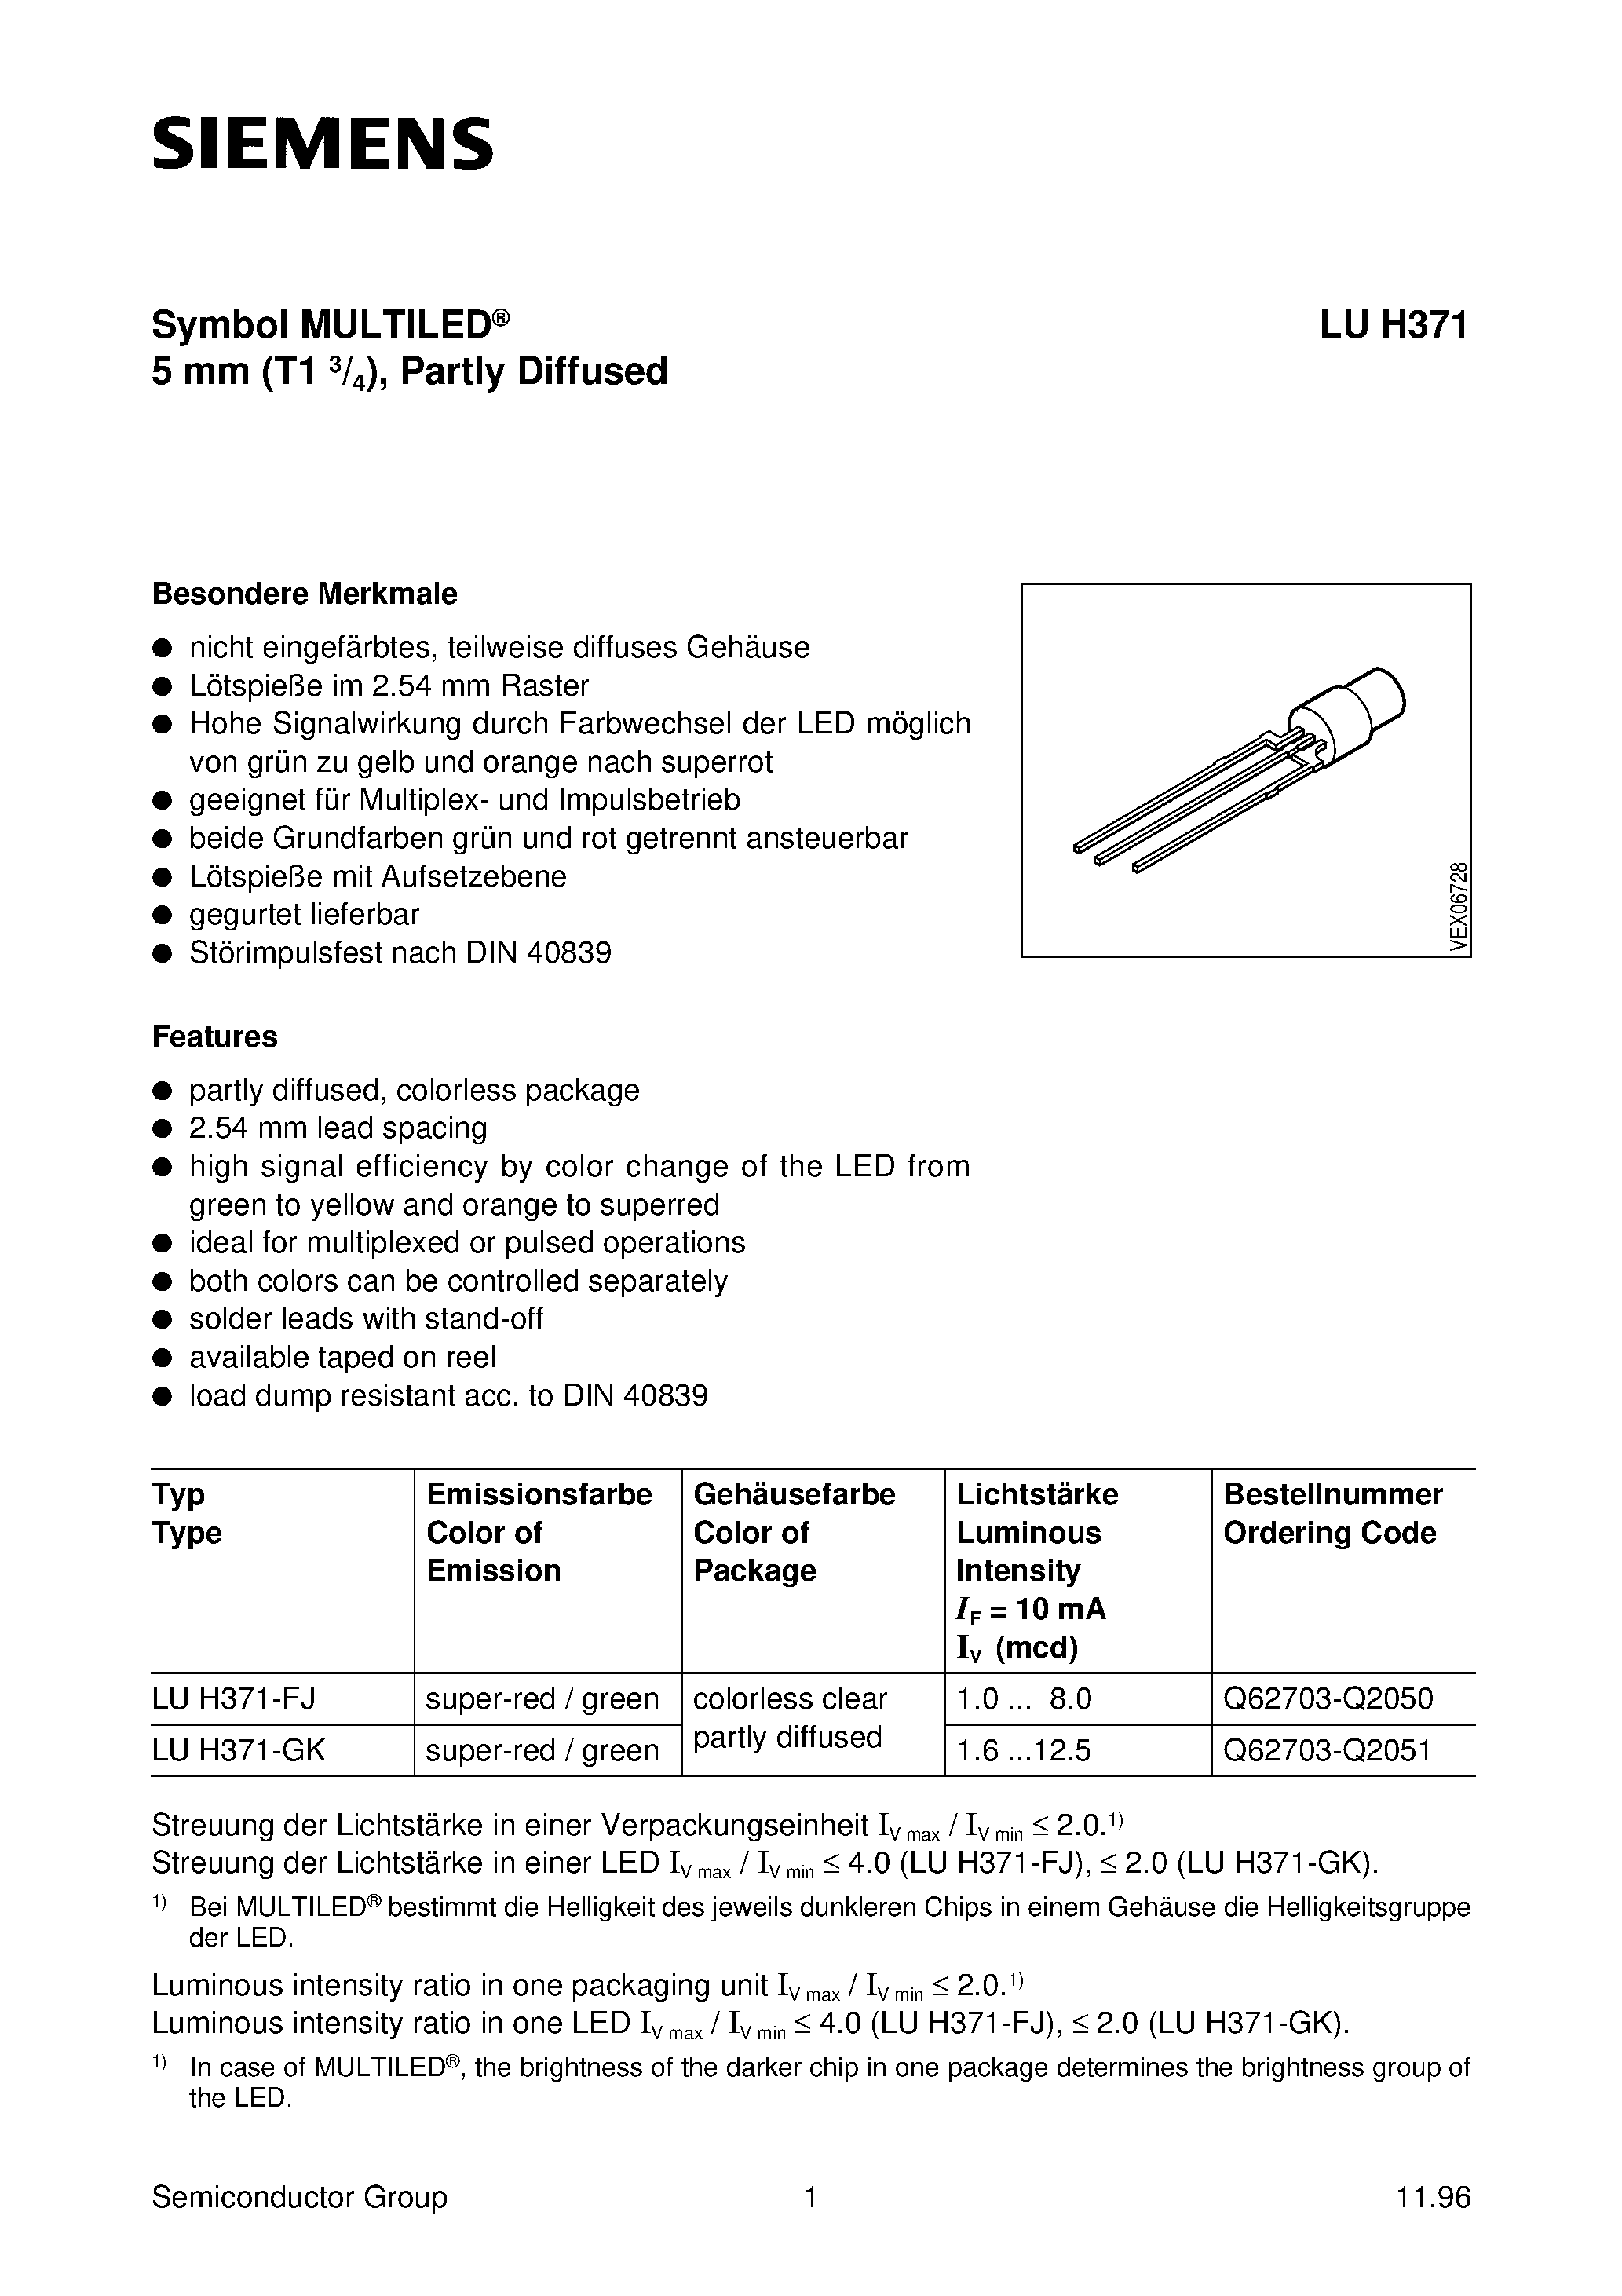 Datasheet LUH371-GK - Symbol MULTILED 5 mm T1 3/4/ Partly Diffused page 1